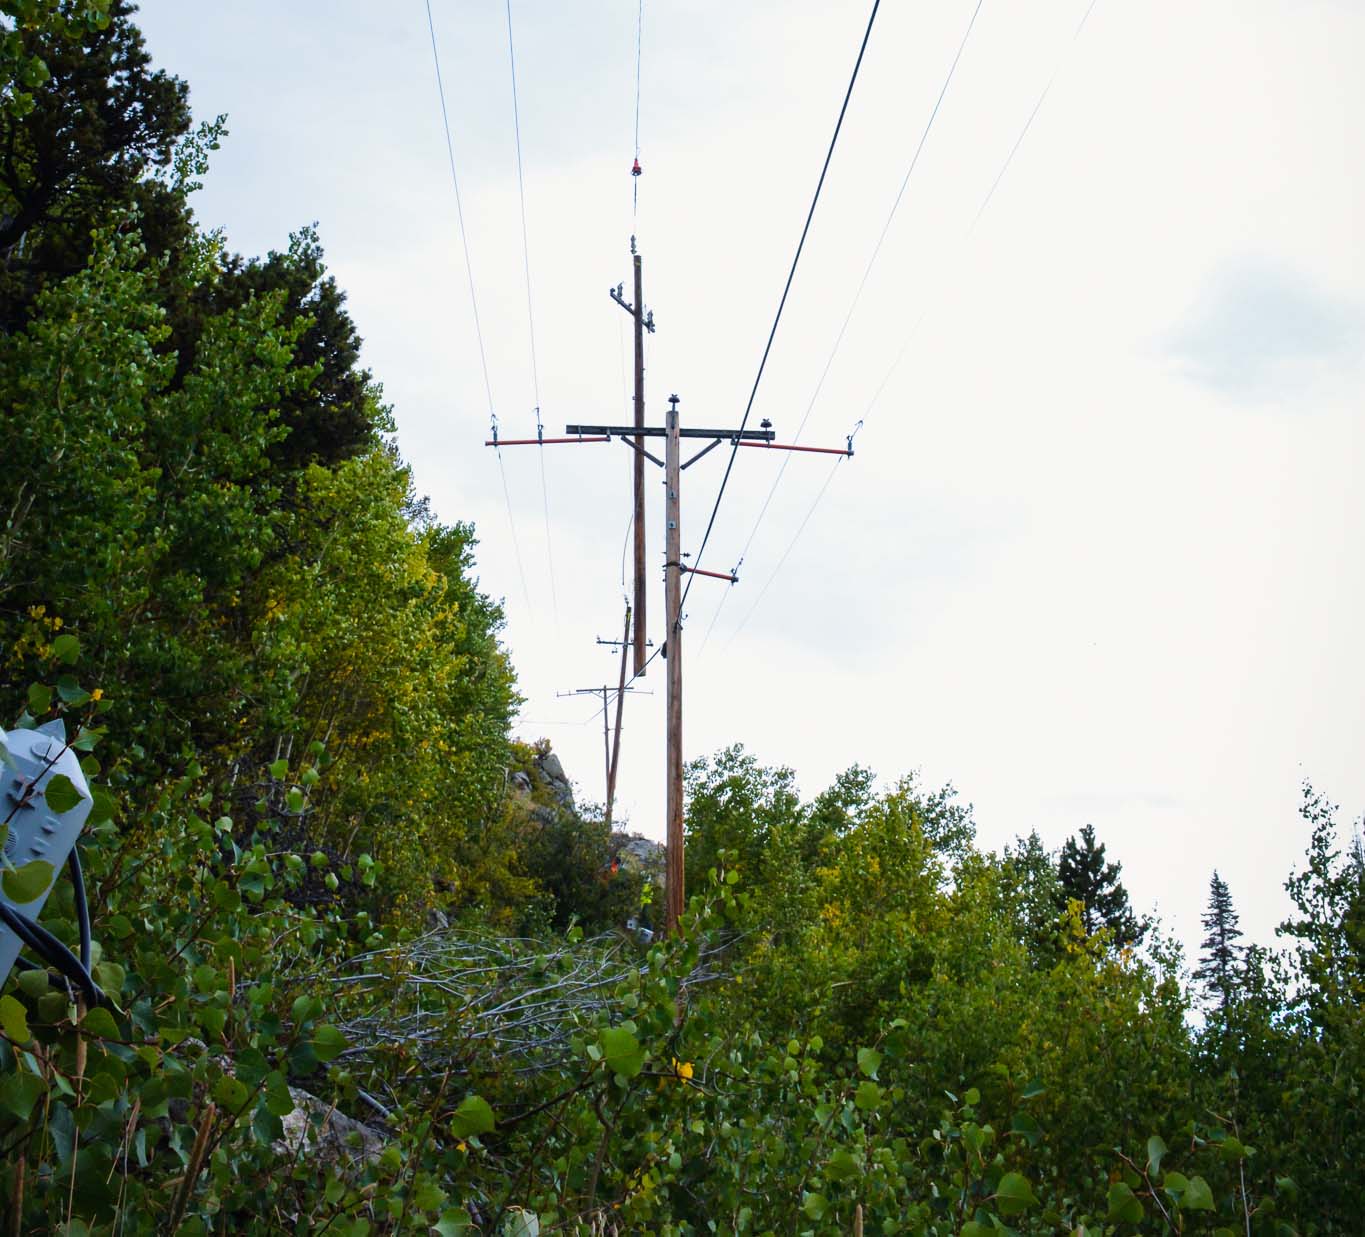 Row of power lines with one being installed